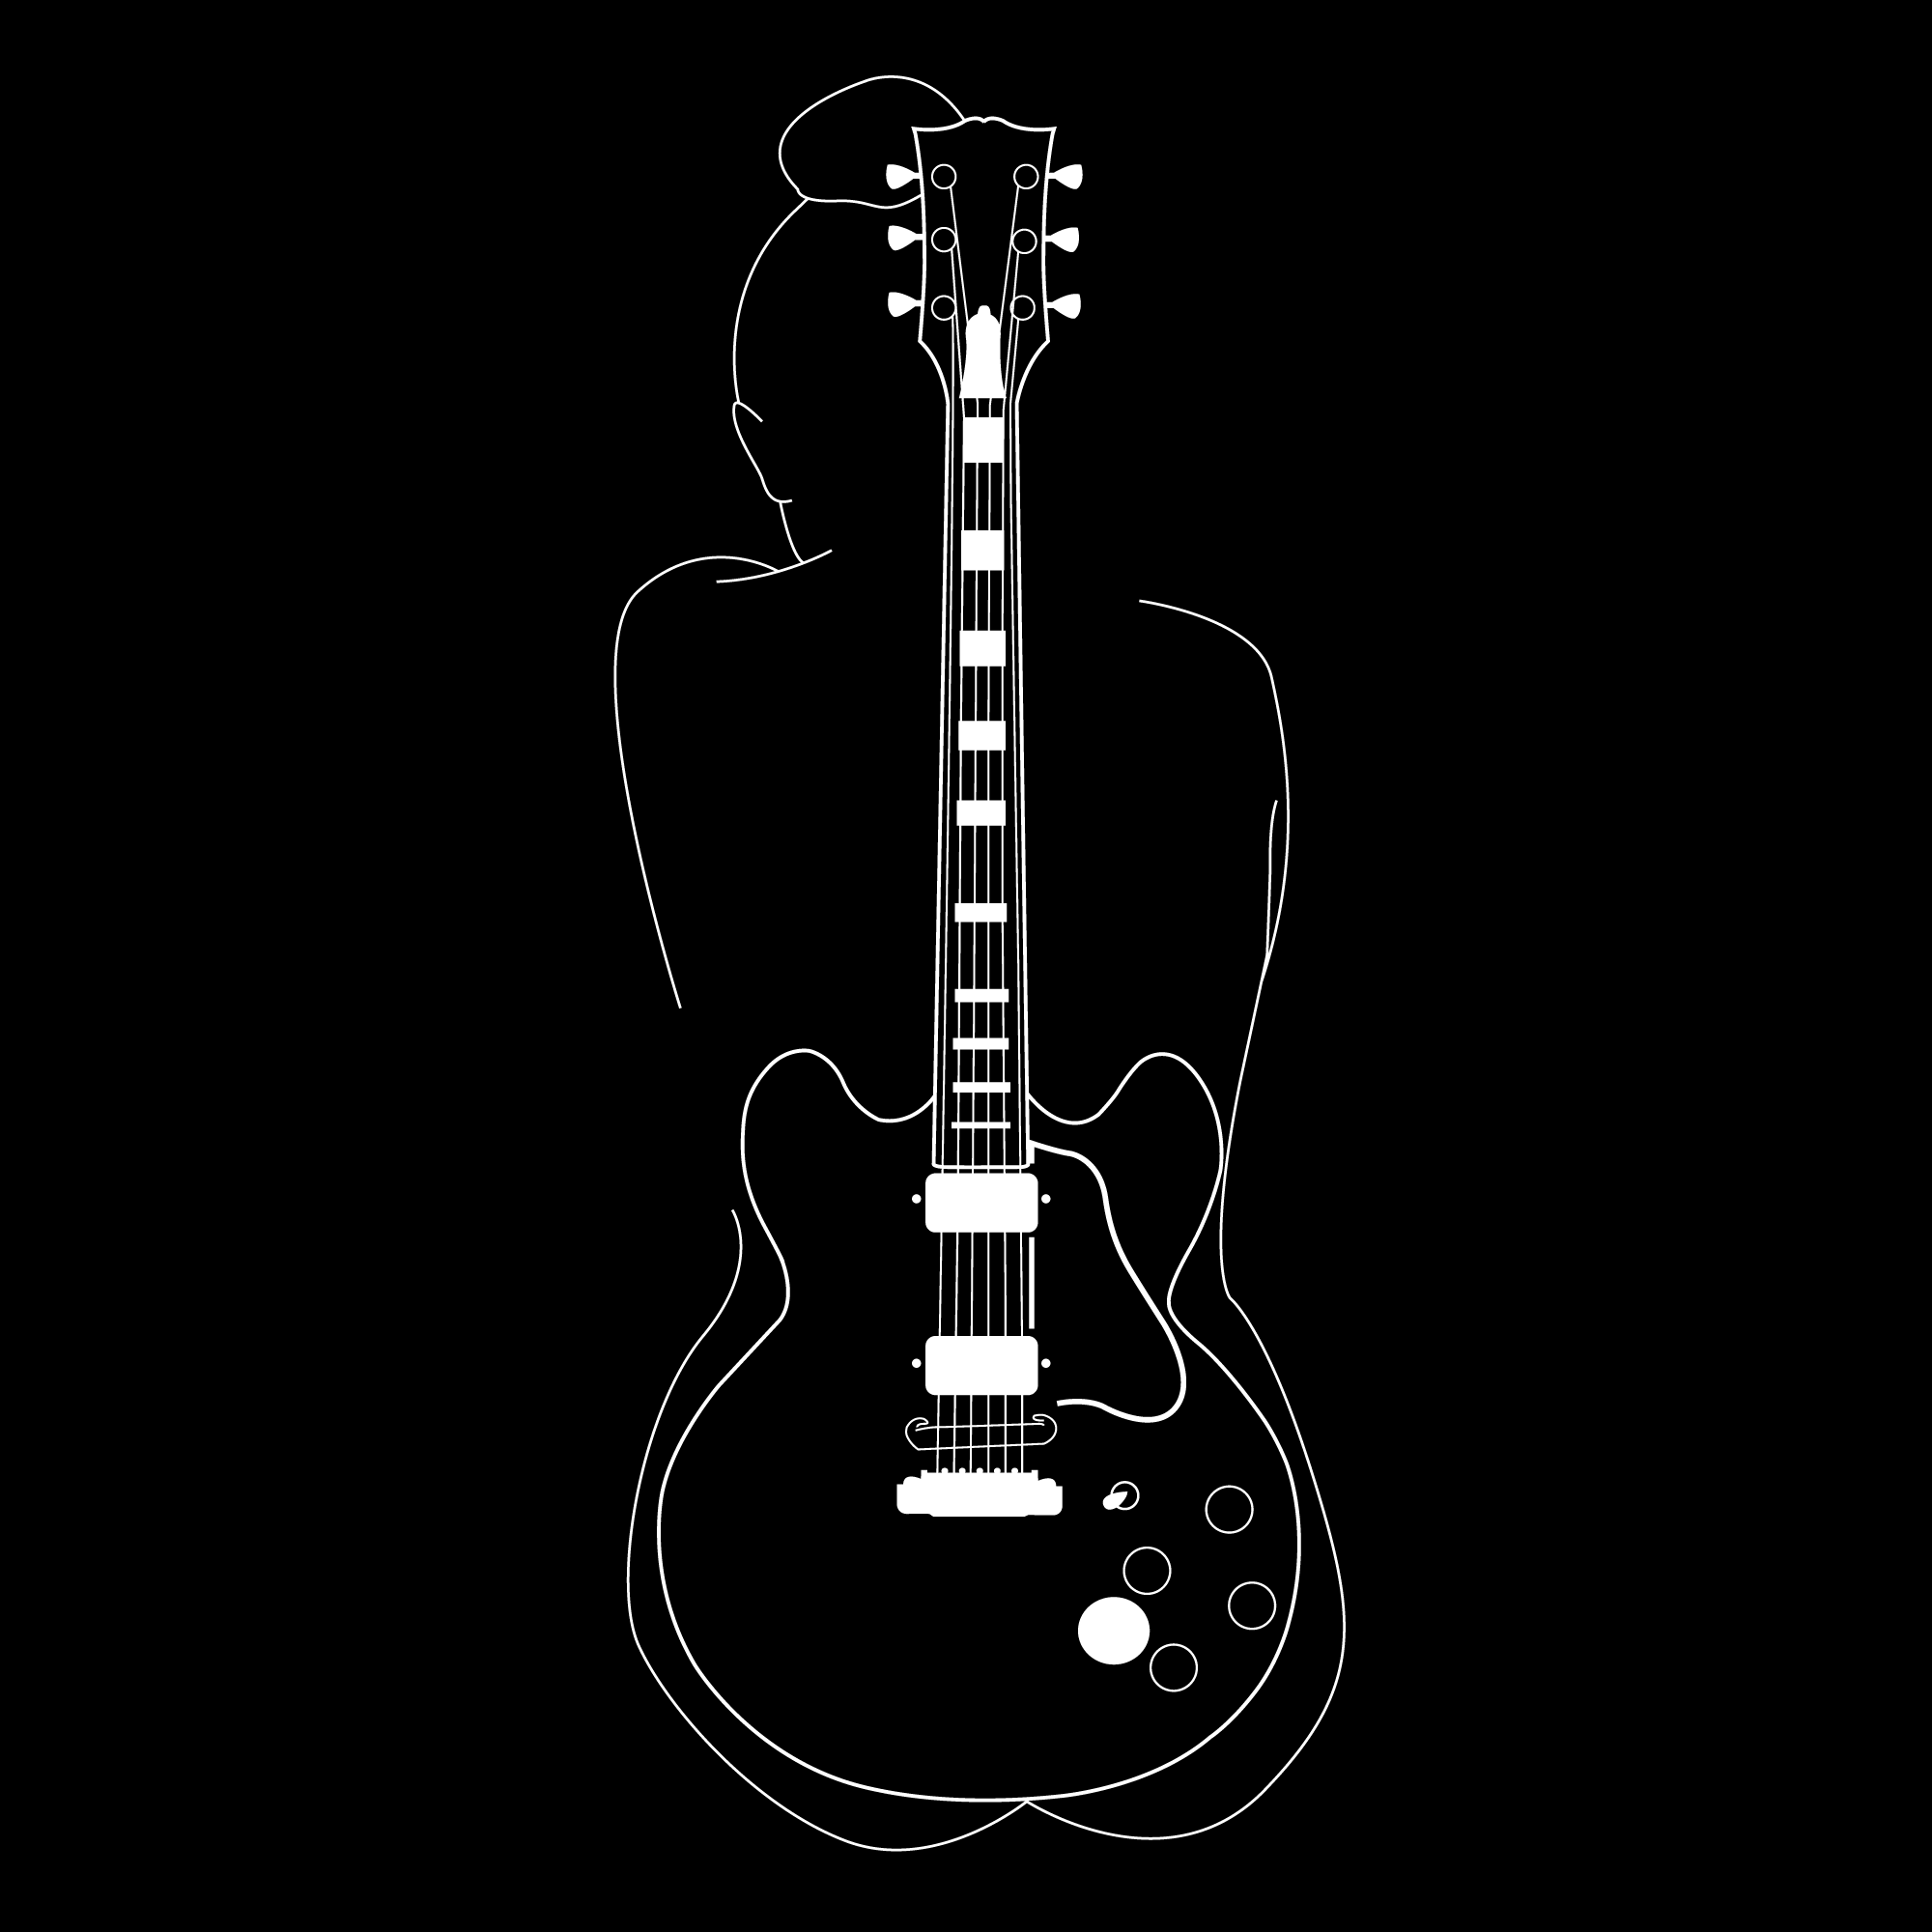 A digital illustration by Clarrie-Anne giclée printed on eco fine art paper titled Lucille. Featuring a white line outline of a female and the Gibson guitar of BB King with a black background.